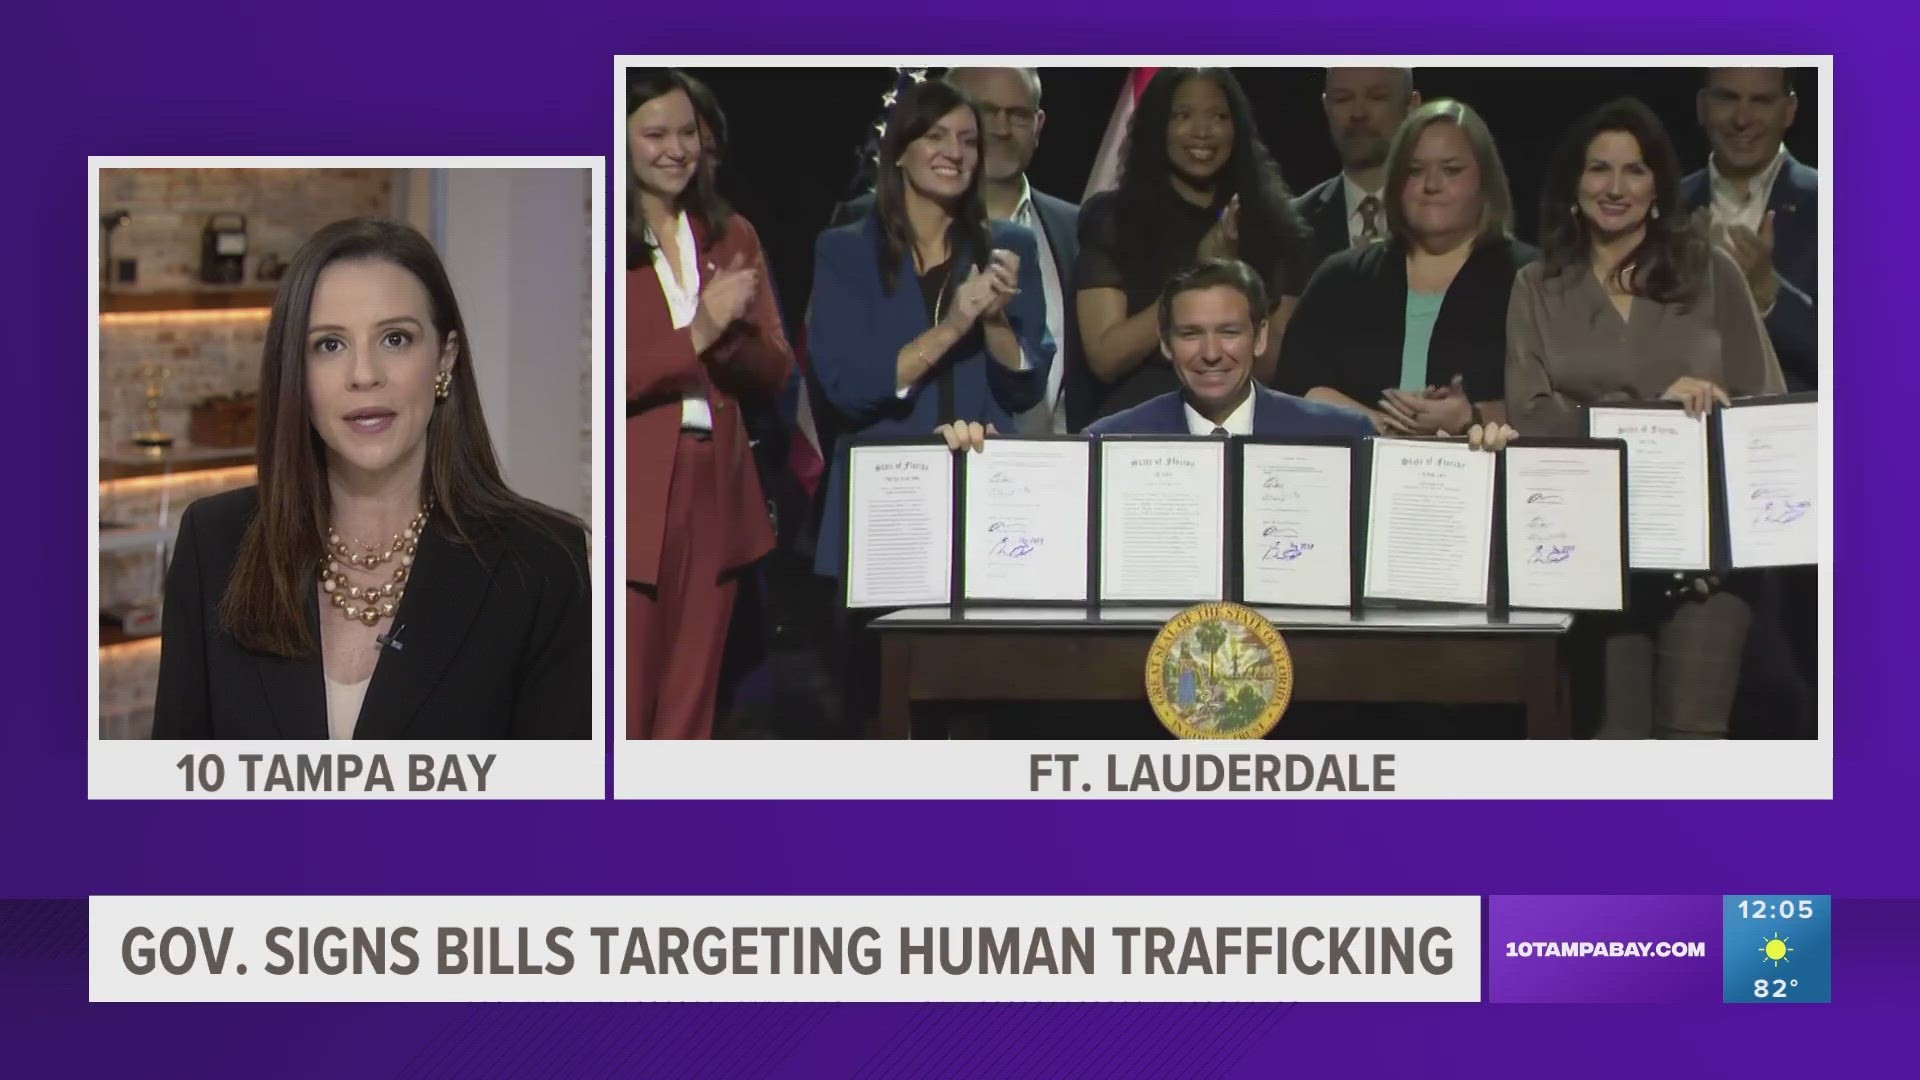 "I'm here to say [in] Florida, we want to use every resource at our disposal to put human traffickers out of business and in a jail," DeSantis said.